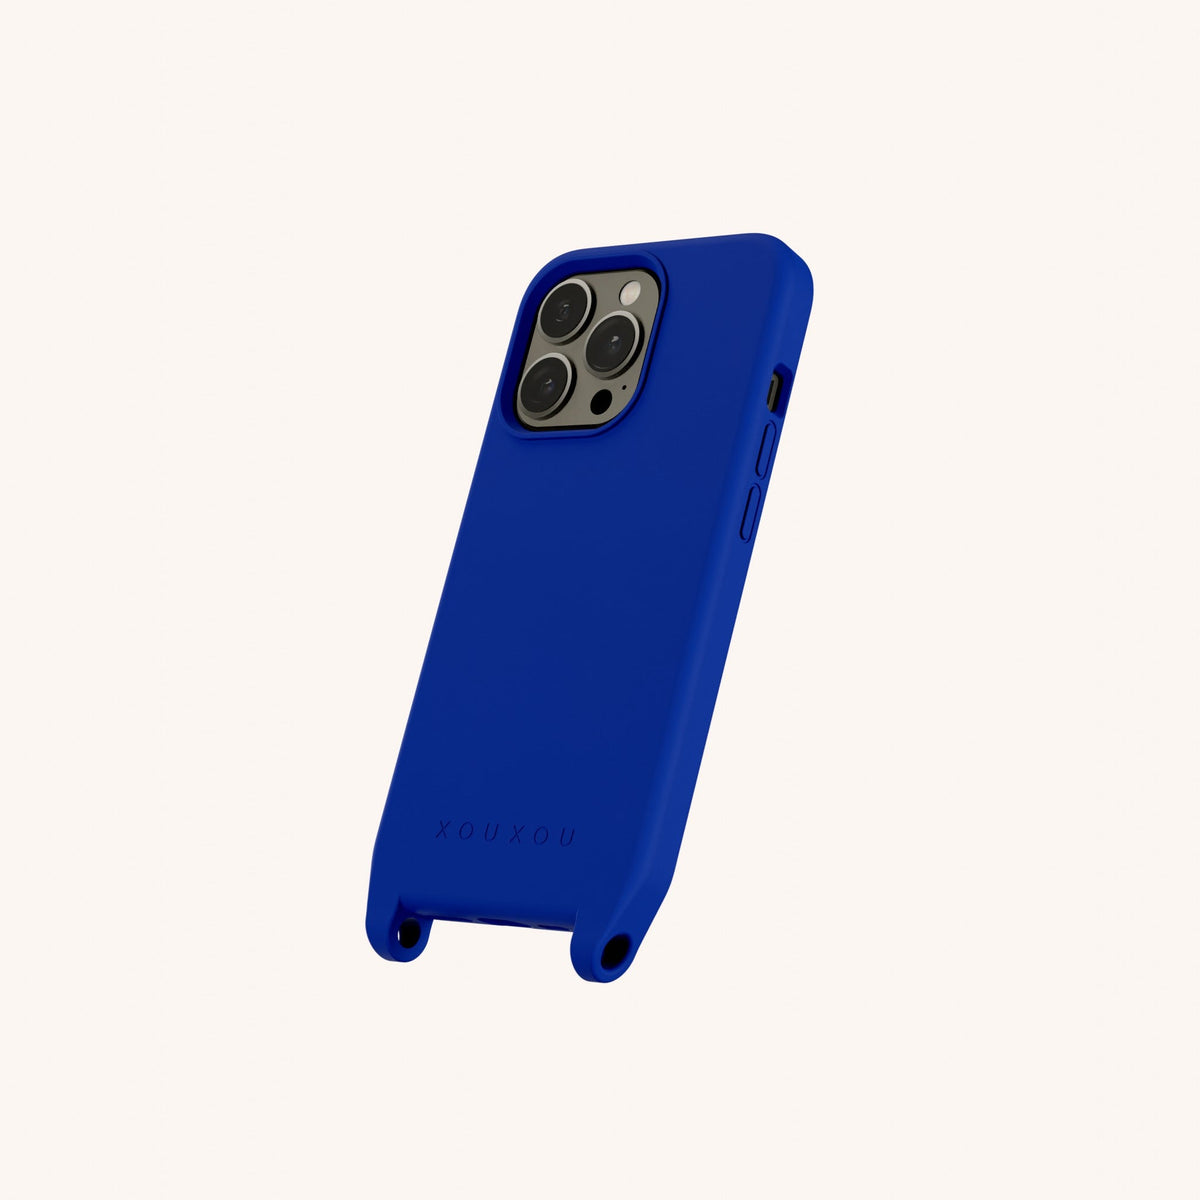 Phone Case with Eyelets for iPhone 13 Pro with MagSafe in Blue Perspective View | XOUXOU #phone model_iphone 13 pro